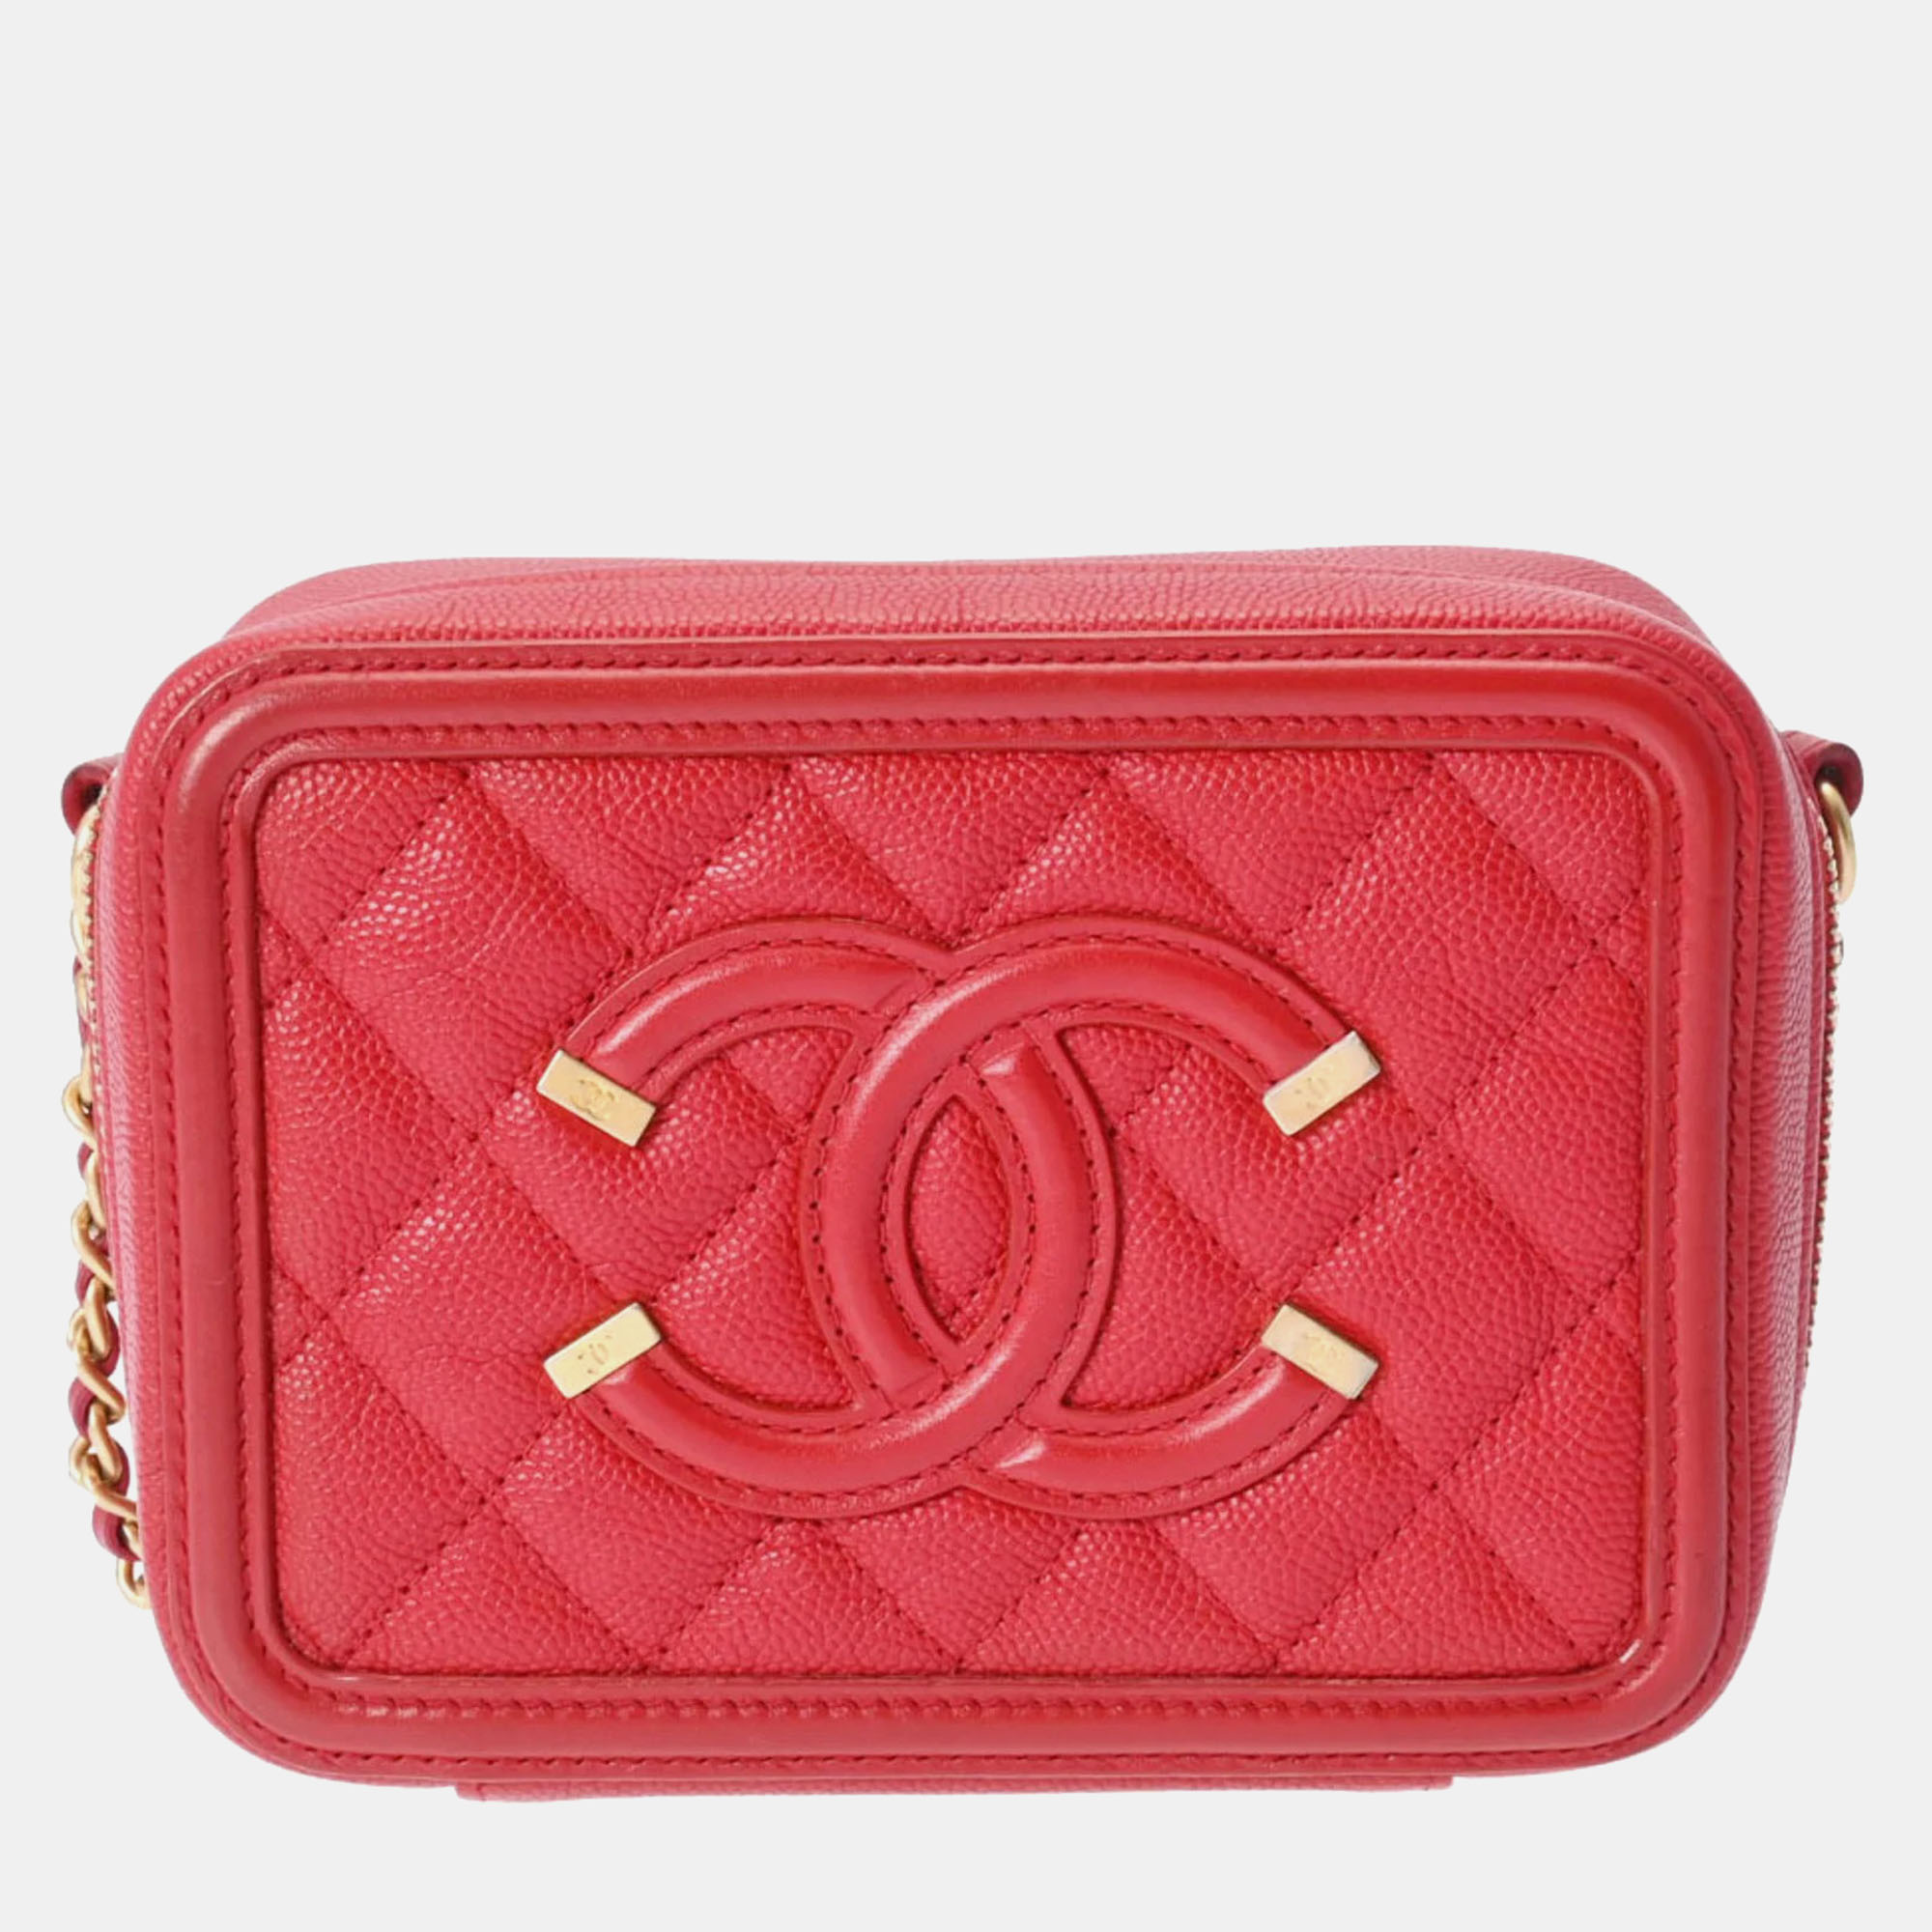 Chanel  leather small filigree shoulder bags